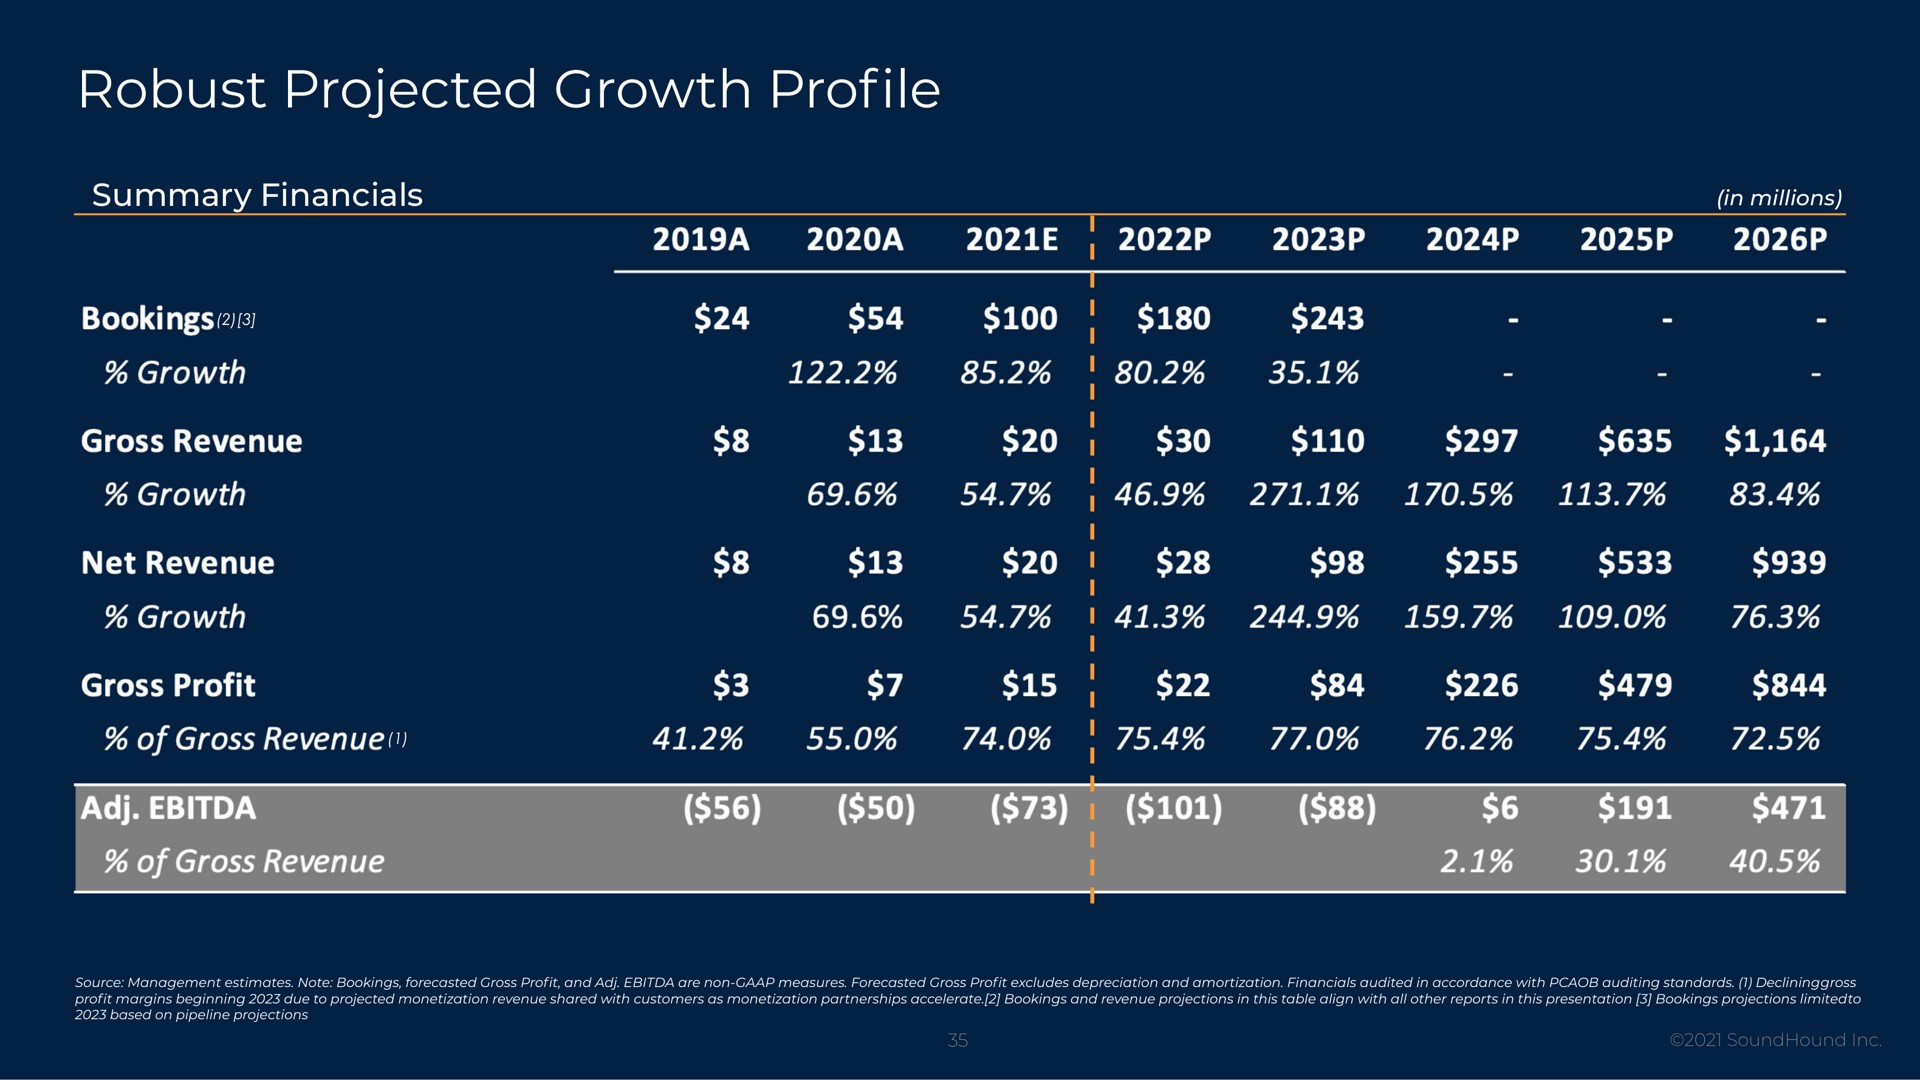 robust projected growth pro profile | SoundHound